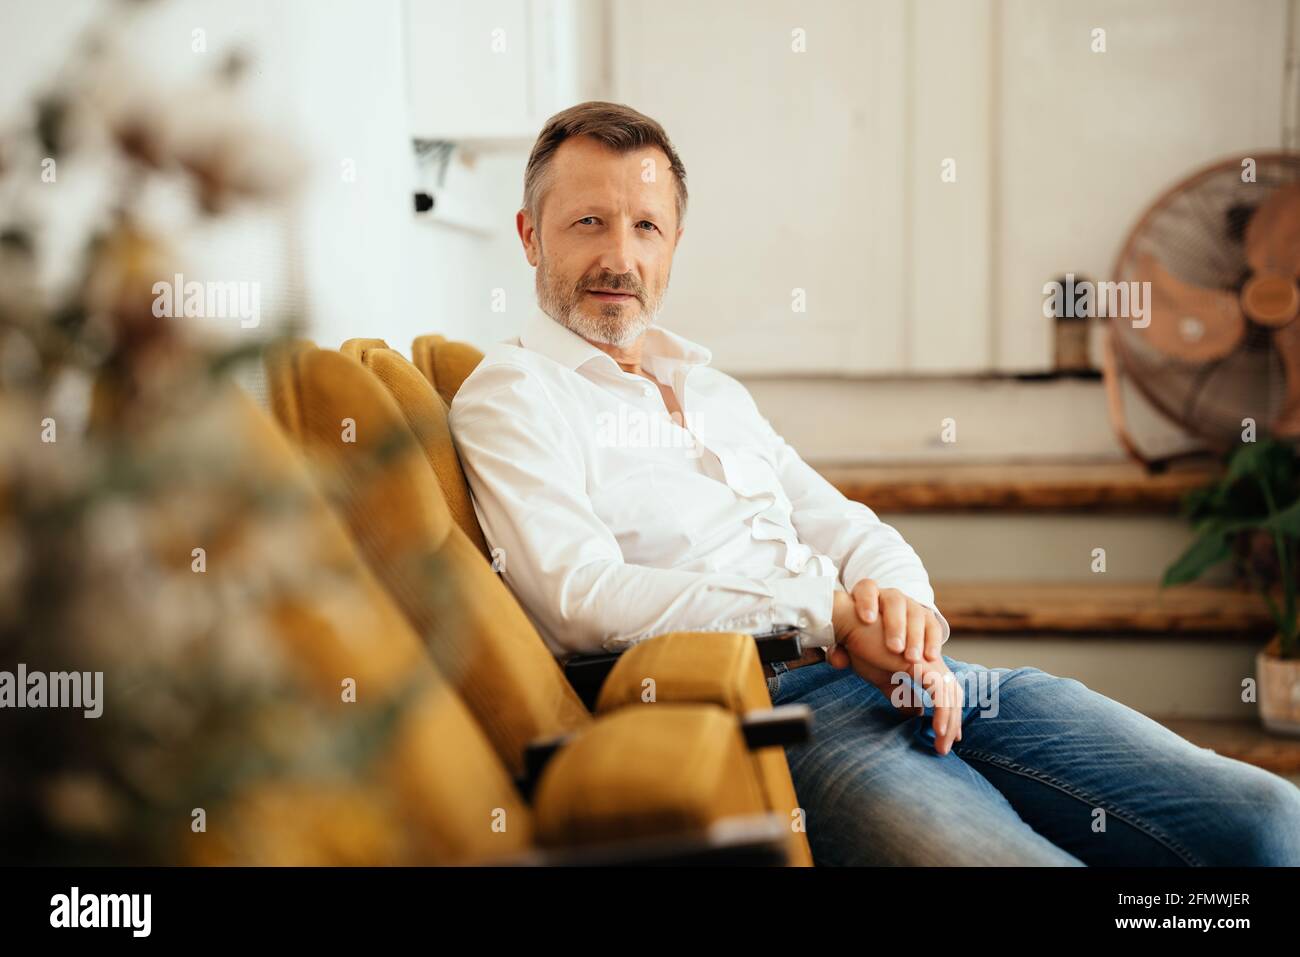 Middle-aged man relaxing in chair staring intently at the camera with an inscrutable expression indoors viewed past a potted plant with copyspace Stock Photo